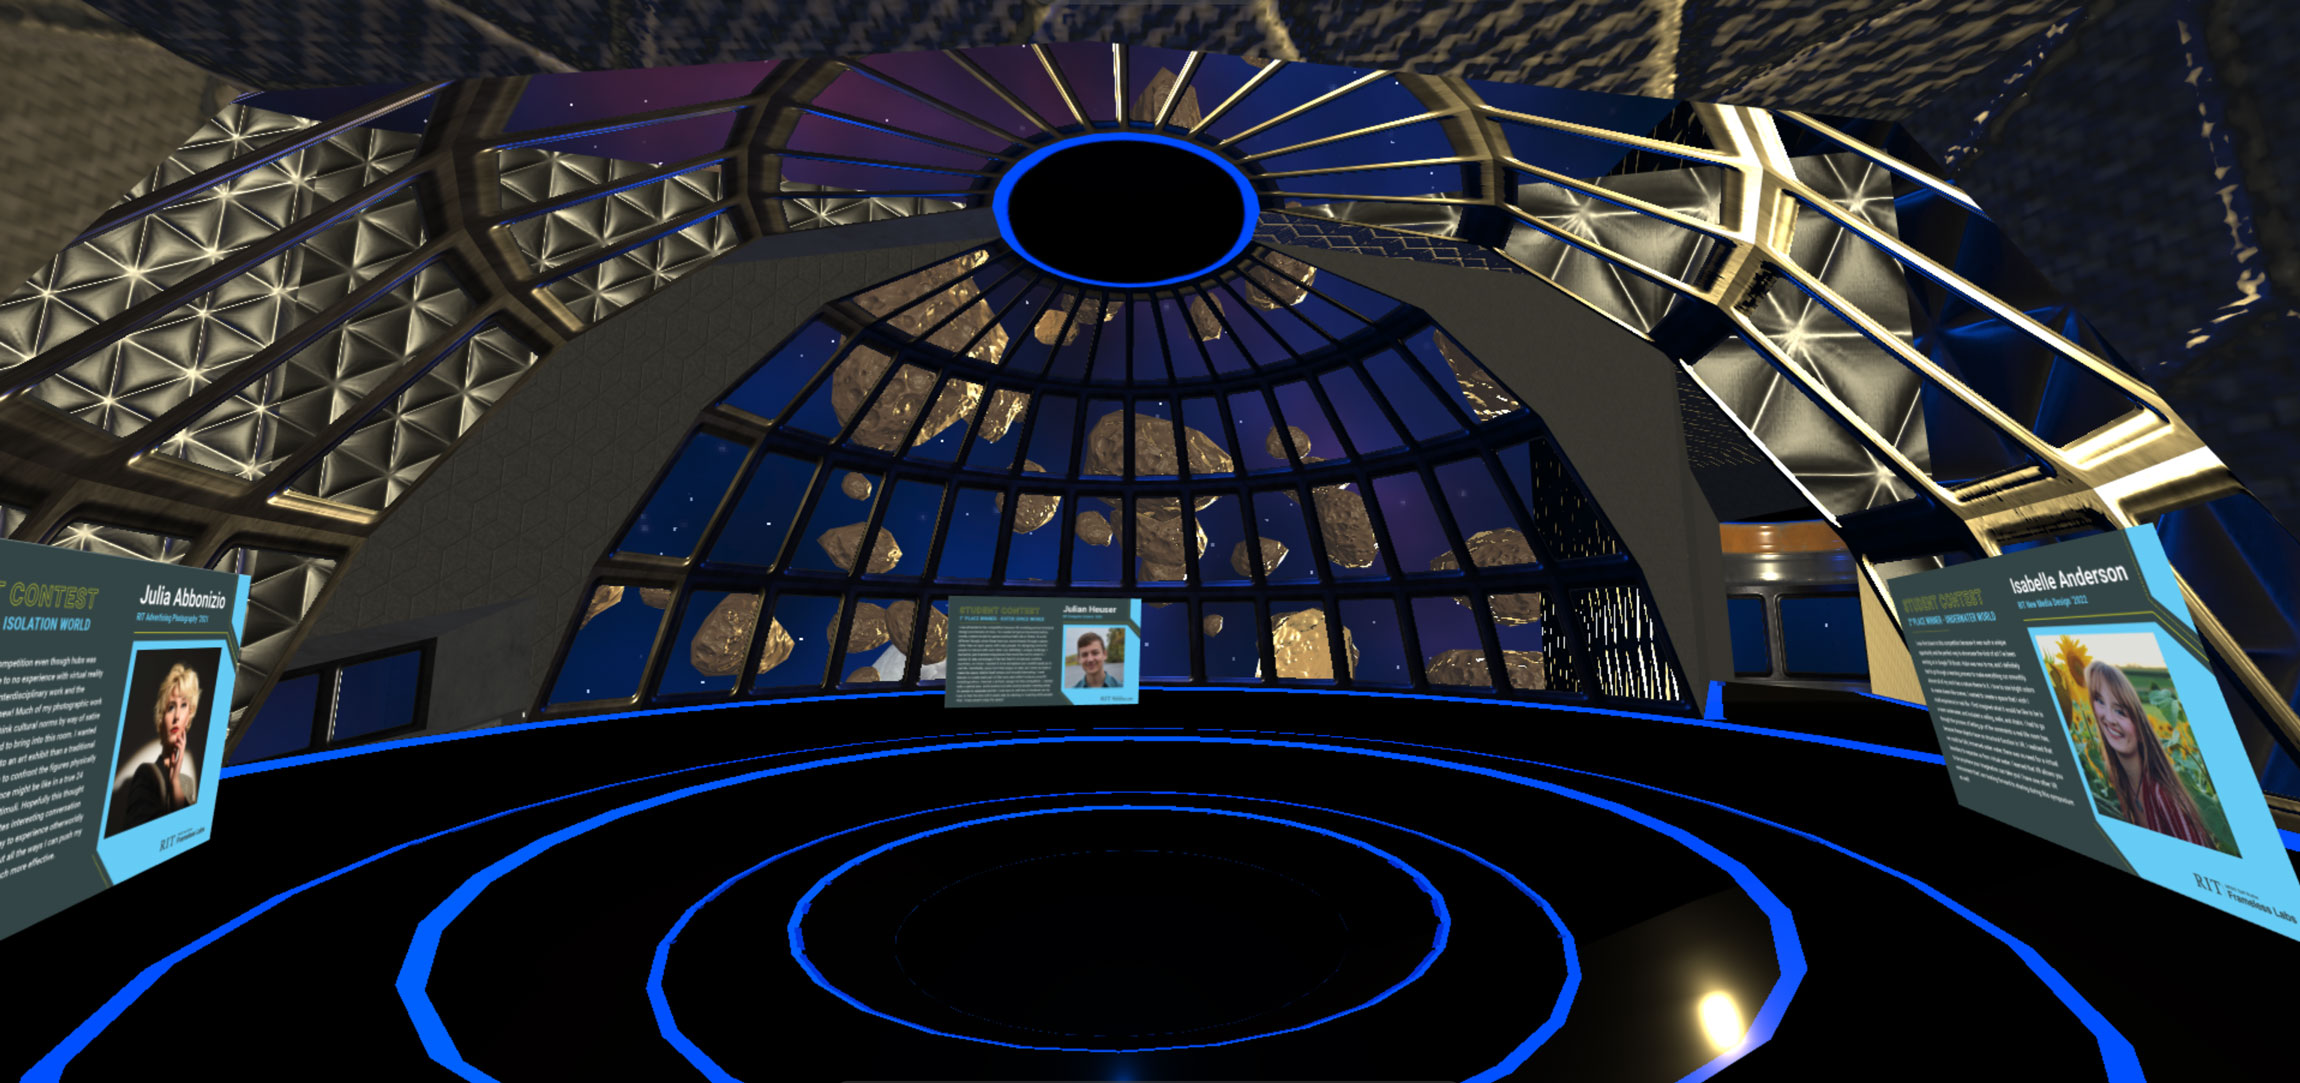 A view of inside the space station middle room, circular blue lights illuminate the room and the windows show asteroids floating in outer space.